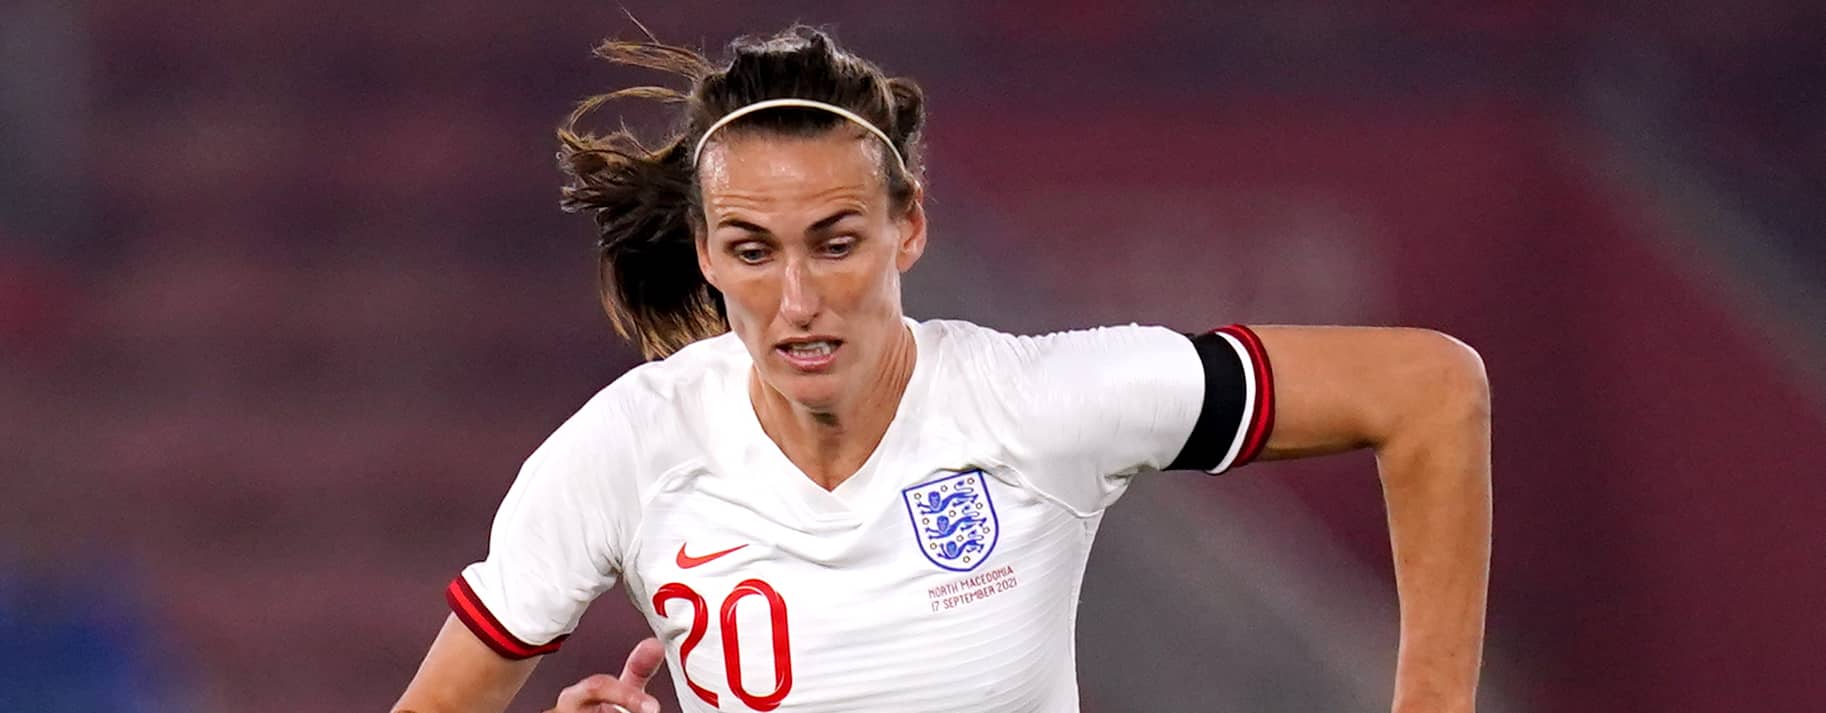 Uefa women’s euro 2022: england’s jill scott on how football boosts her wellbeing off the pitch